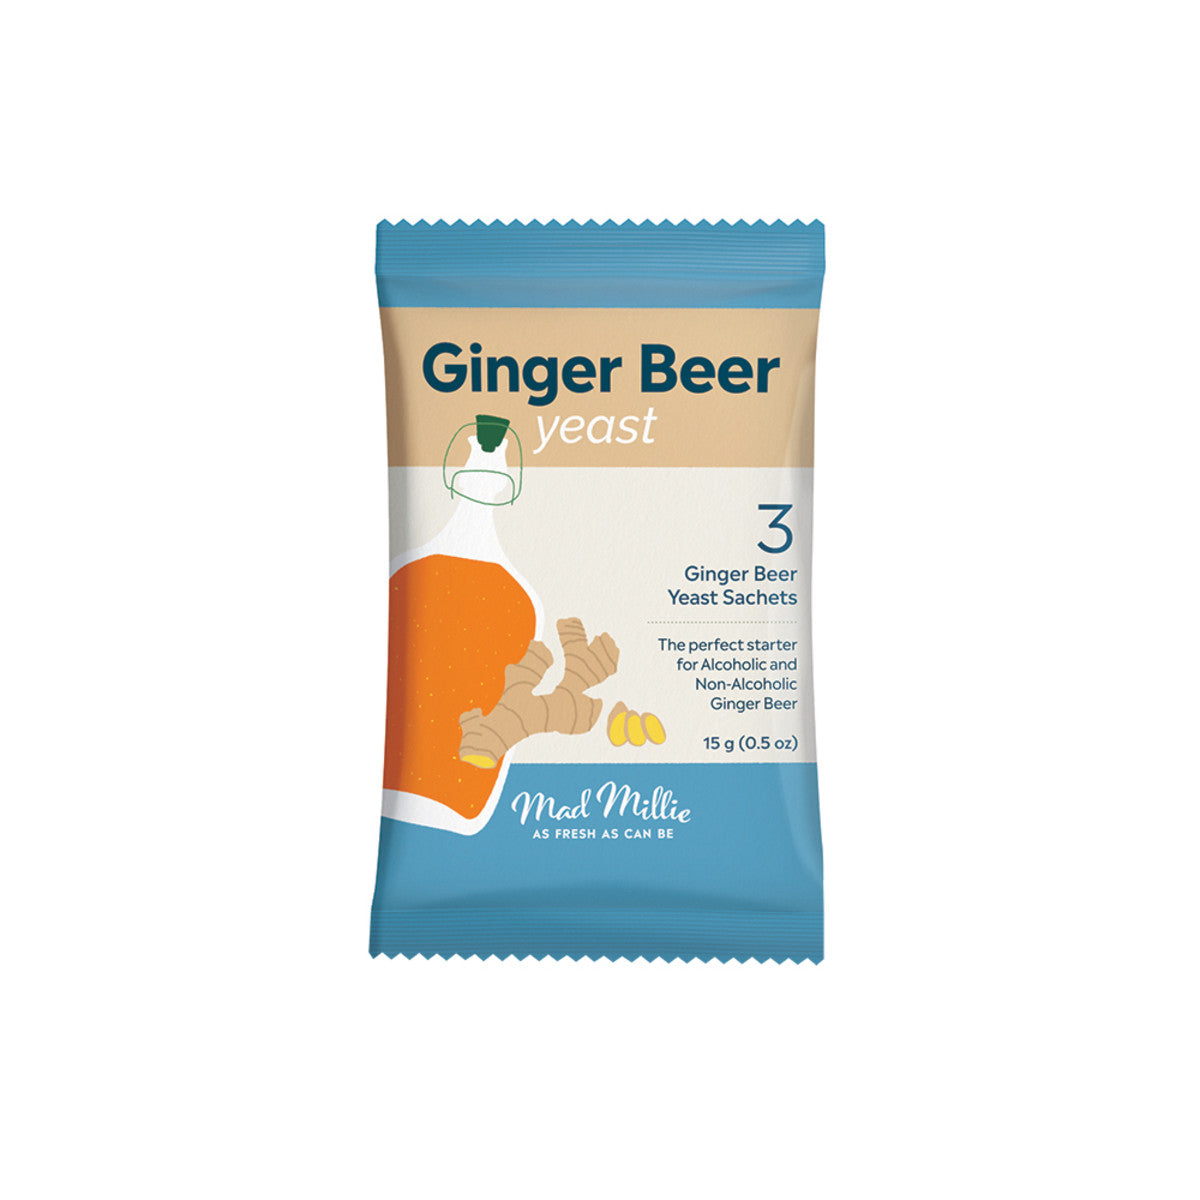 Mad Millie - Ginger Beer Yeast 5g x 3 Pack